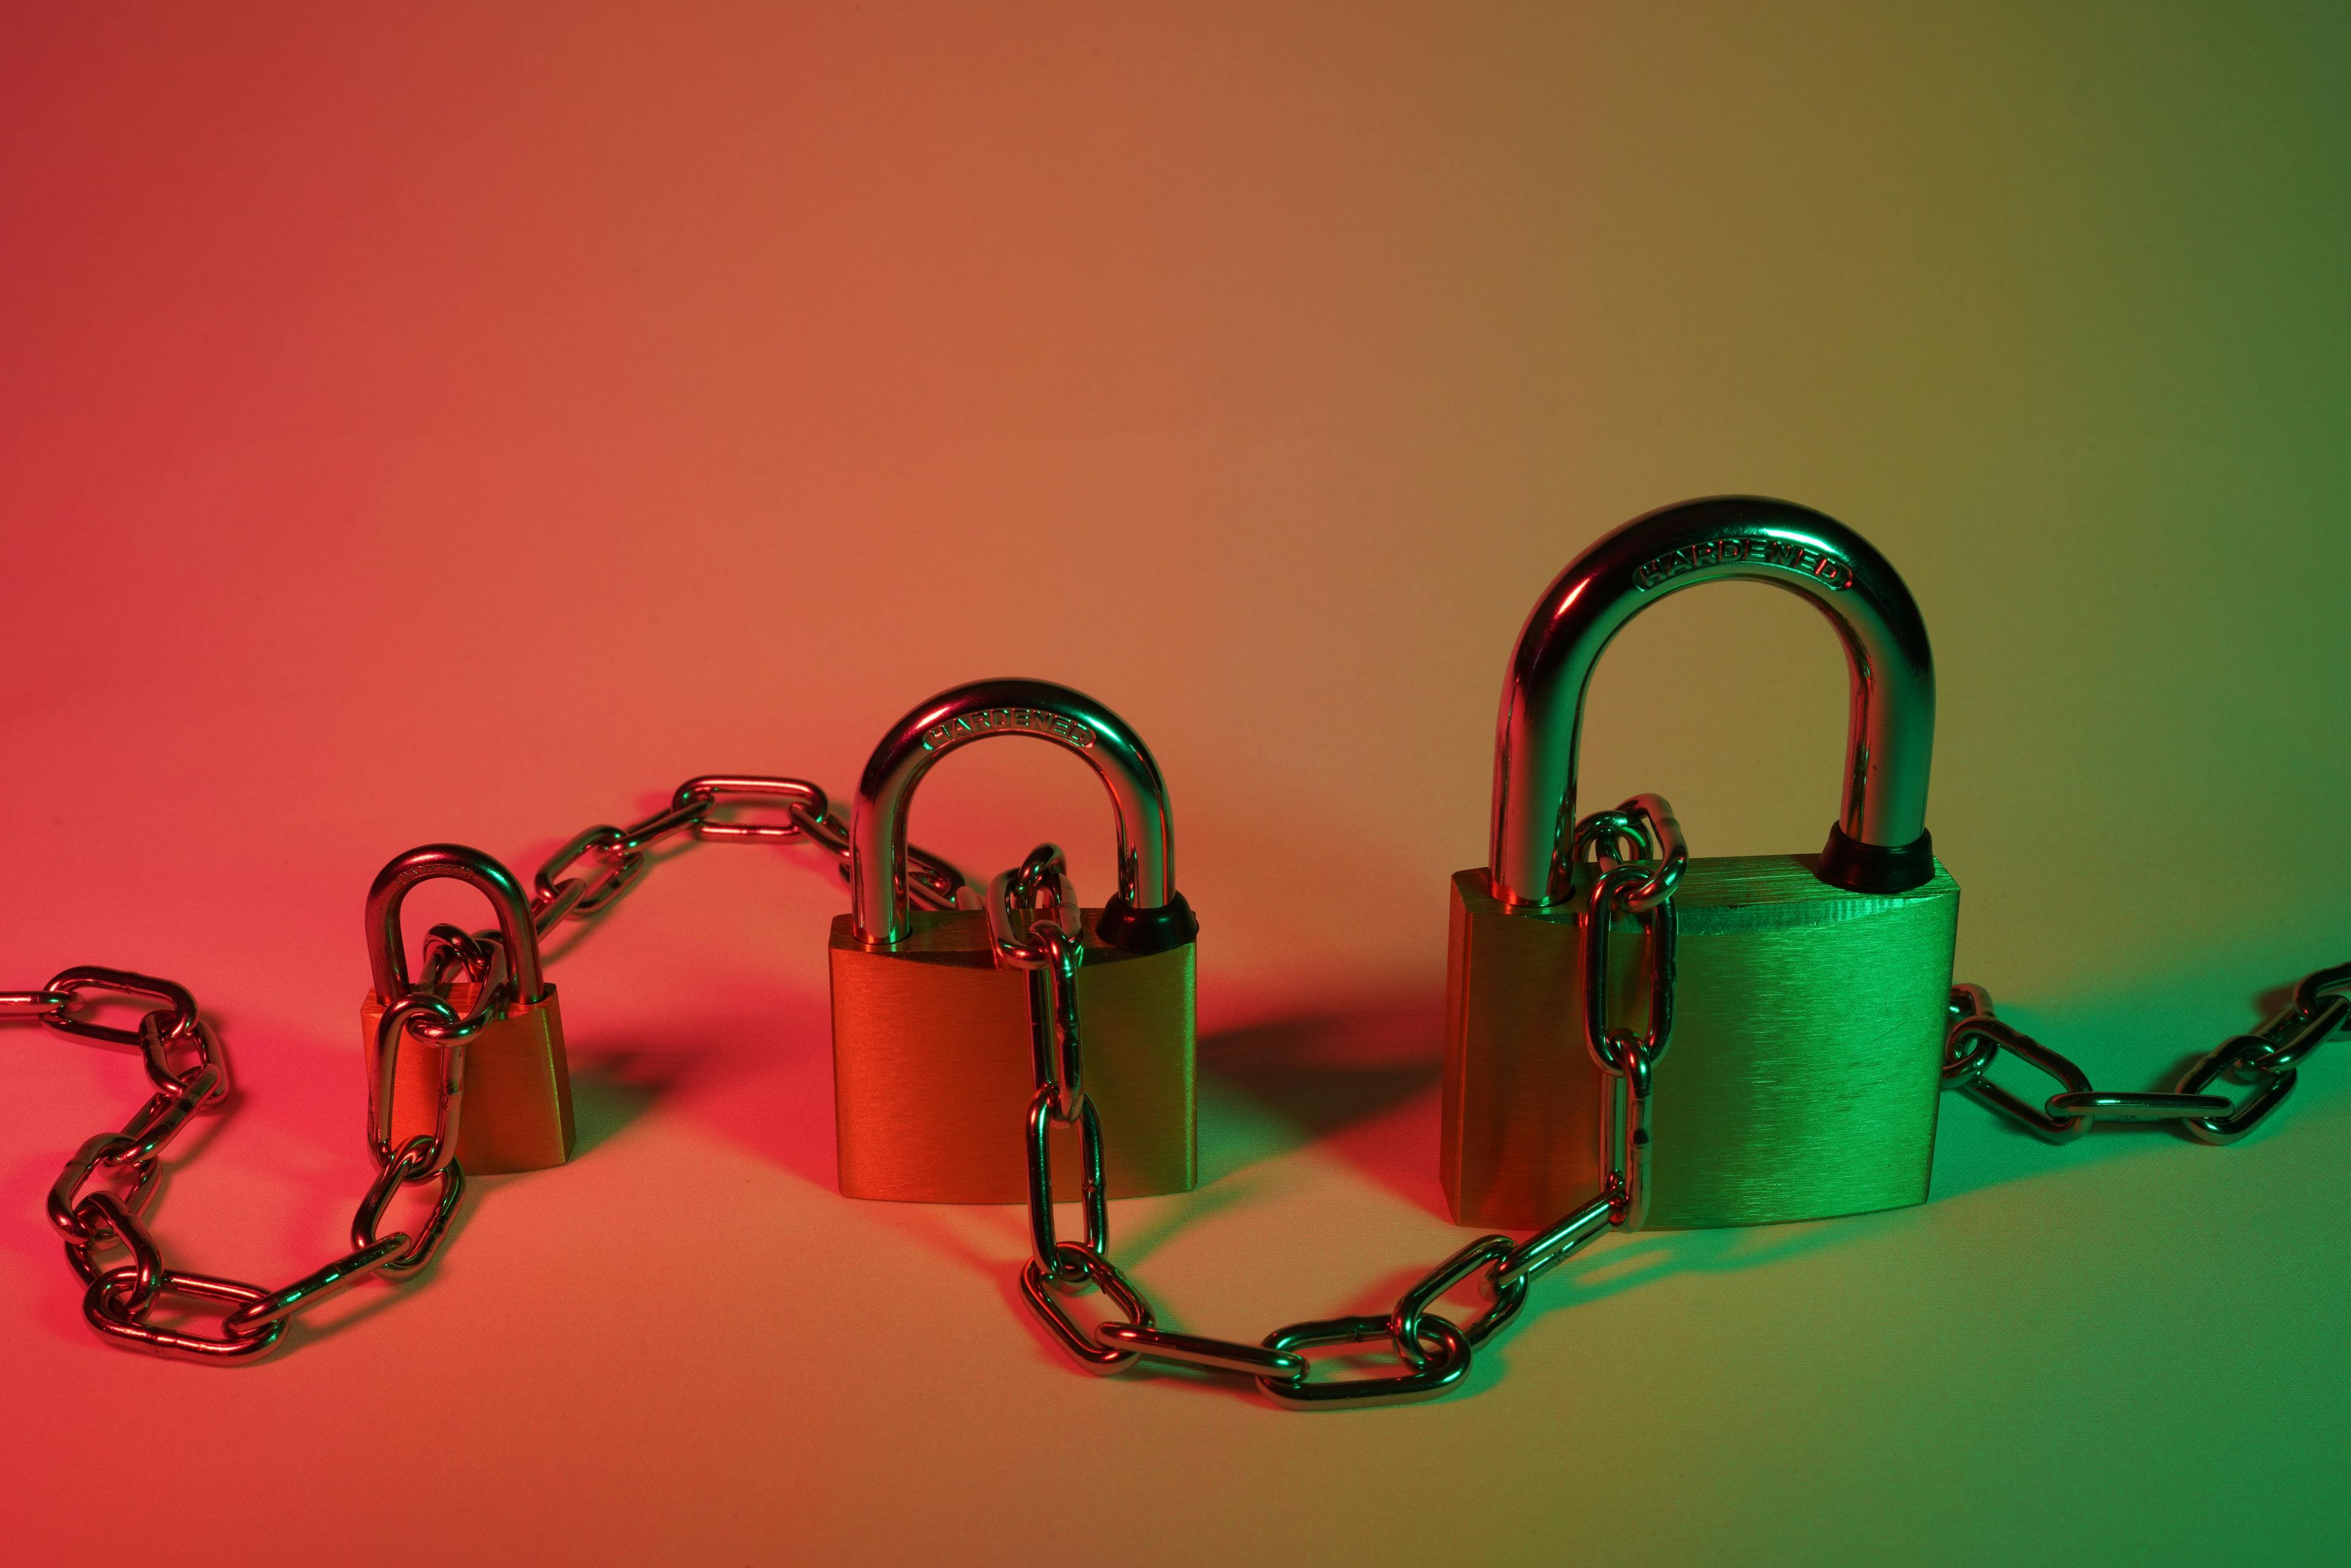 Three padlocks connected by chain to depict security